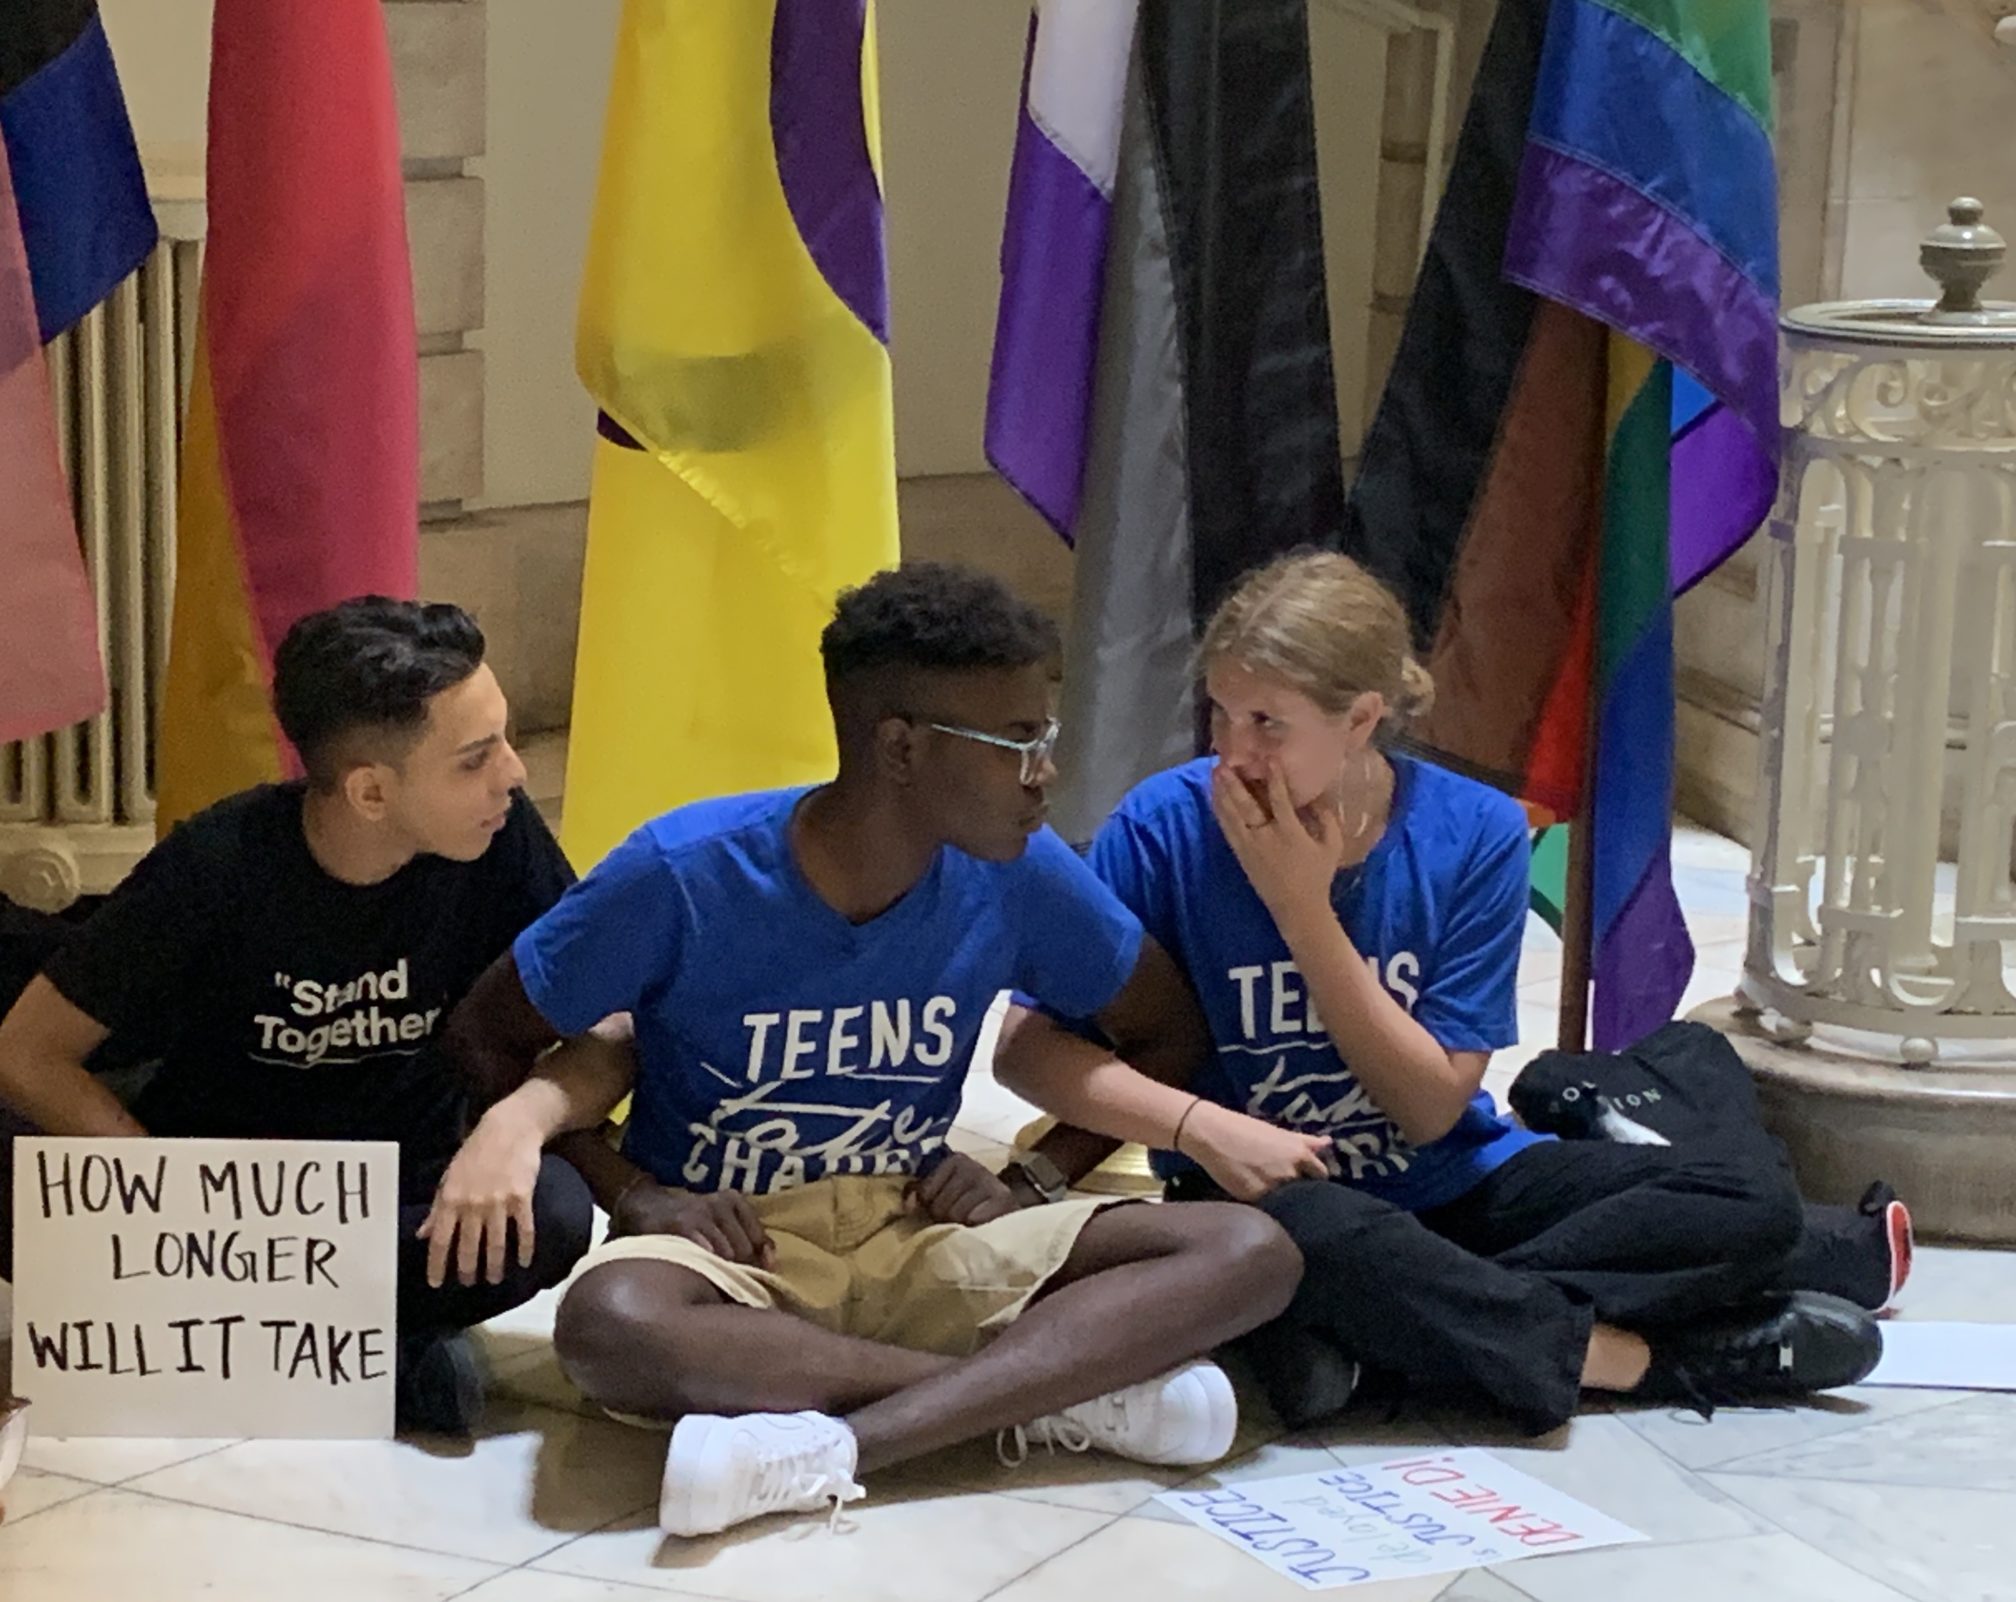 Students stage a sit-in at City Hall to protest school segregation in city public schools. Eagle photo by Meaghan McGoldrick